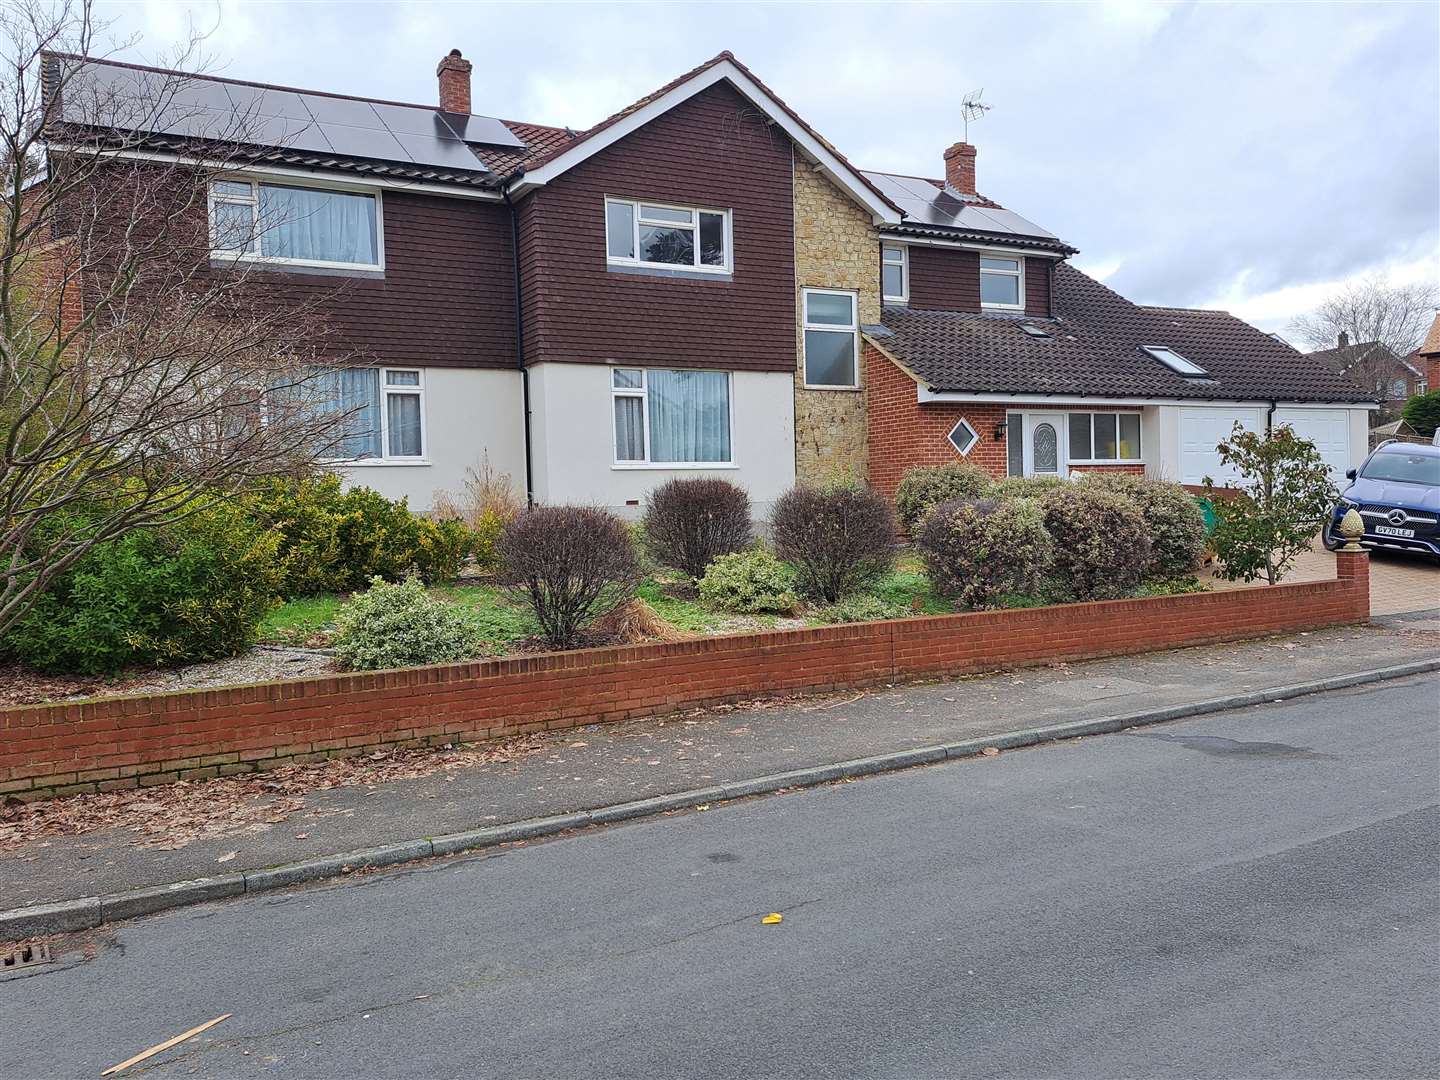 No 2 Trapham Road, Allington,is up for conversion to a 10-bed HMO